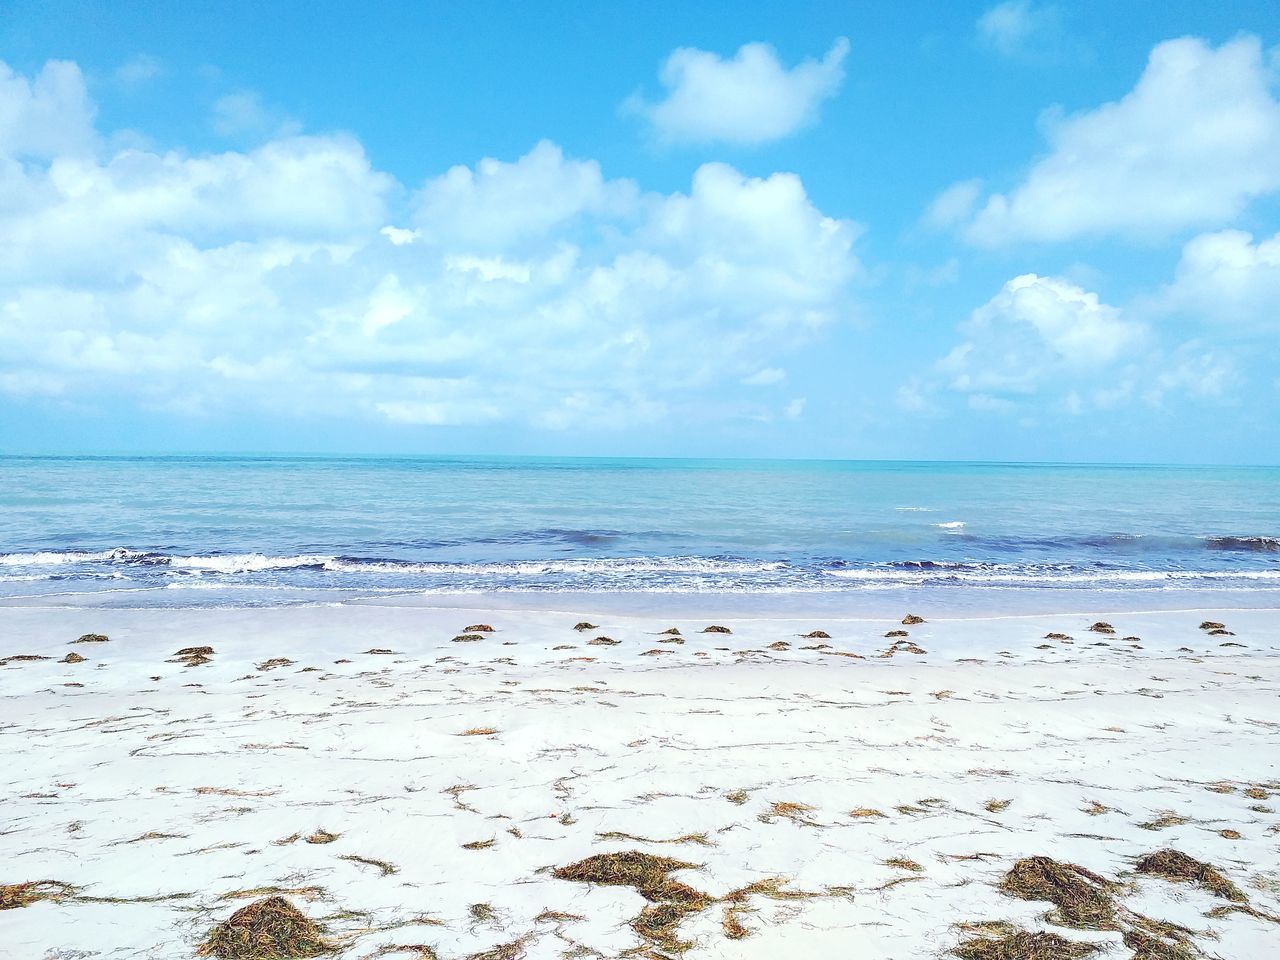 sea, beach, land, sky, water, scenics - nature, beauty in nature, horizon over water, tranquil scene, cloud - sky, tranquility, horizon, sand, nature, idyllic, no people, day, blue, non-urban scene, outdoors, turquoise colored